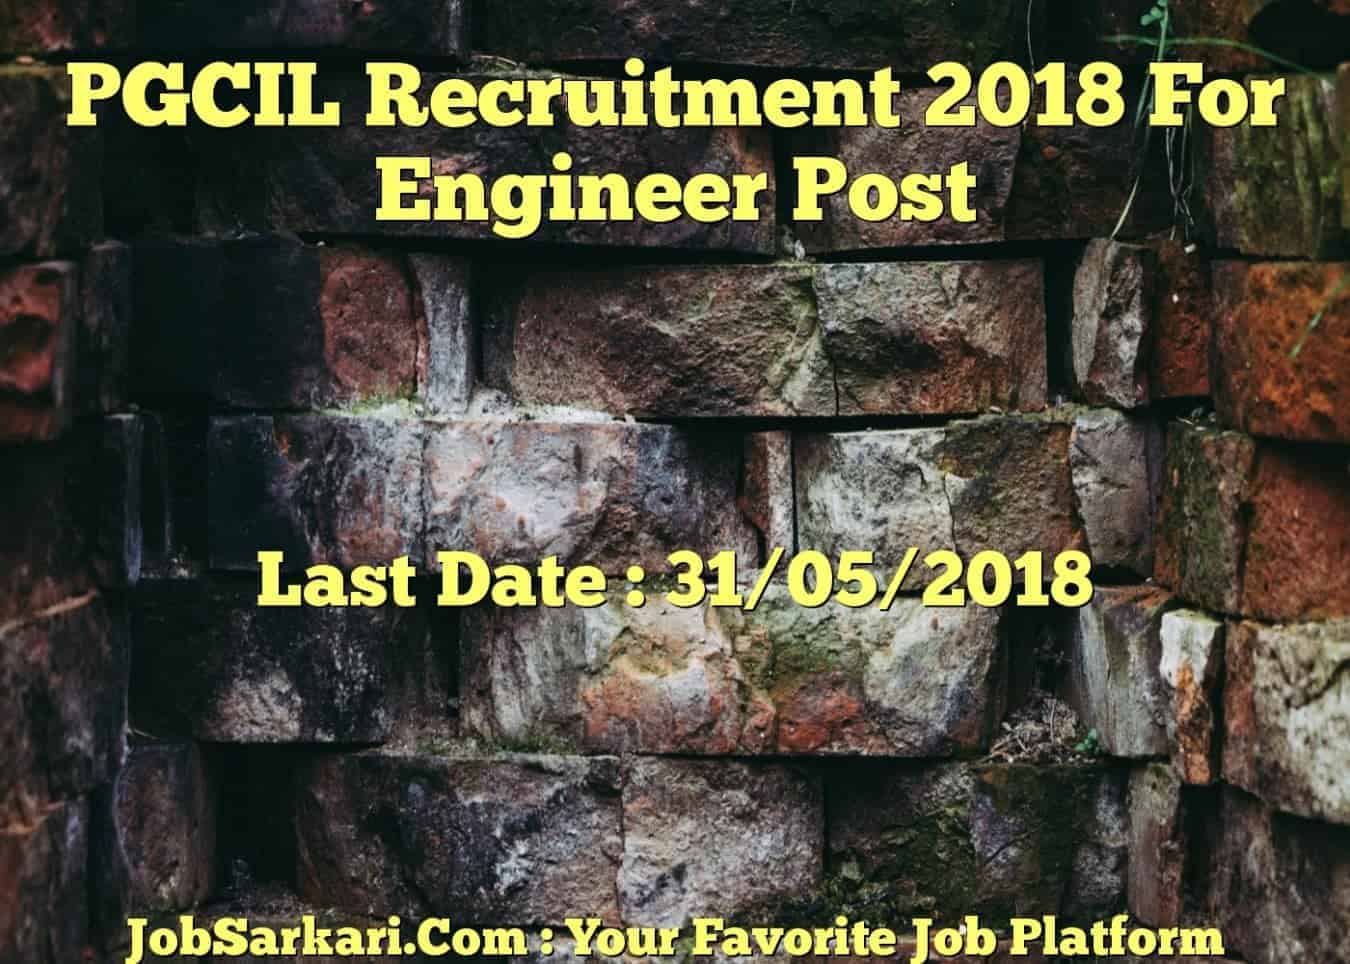 PGCIL Recruitment 2018 For Engineer Post